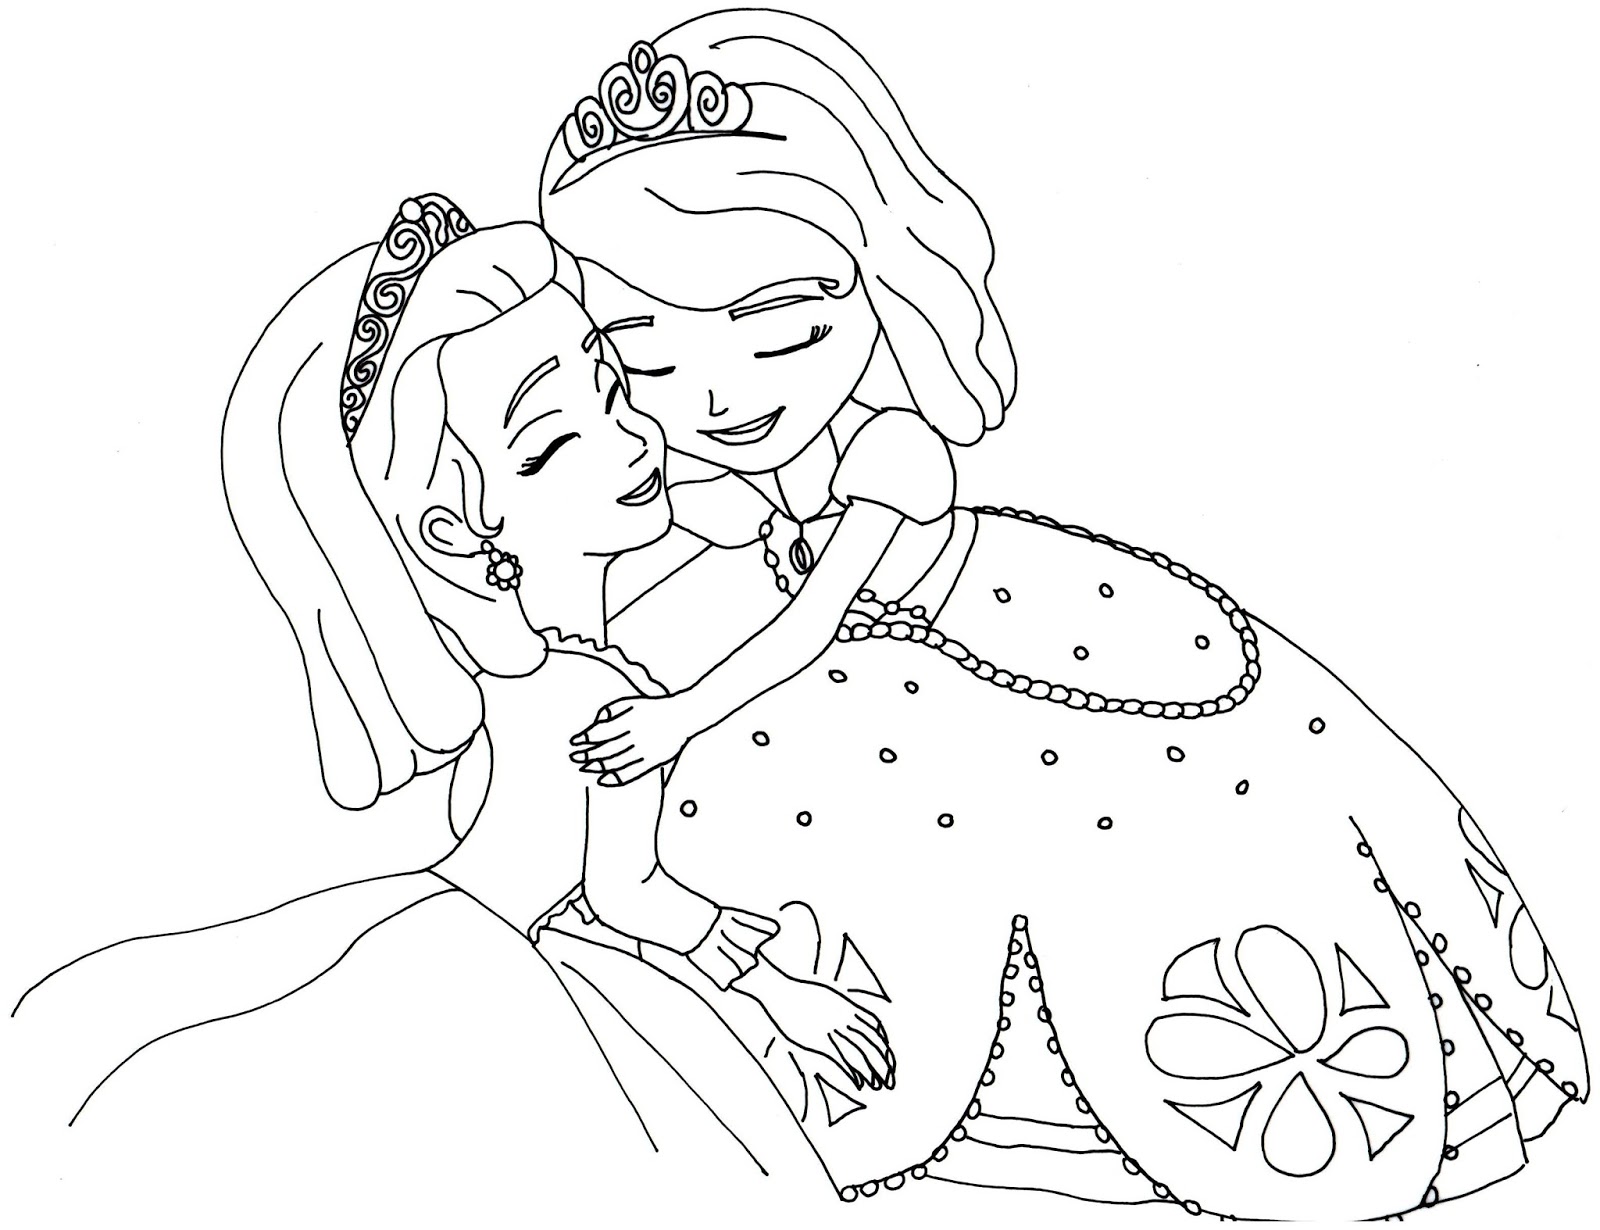 Sofia the First Coloring Pages Best Coloring Pages For Kids